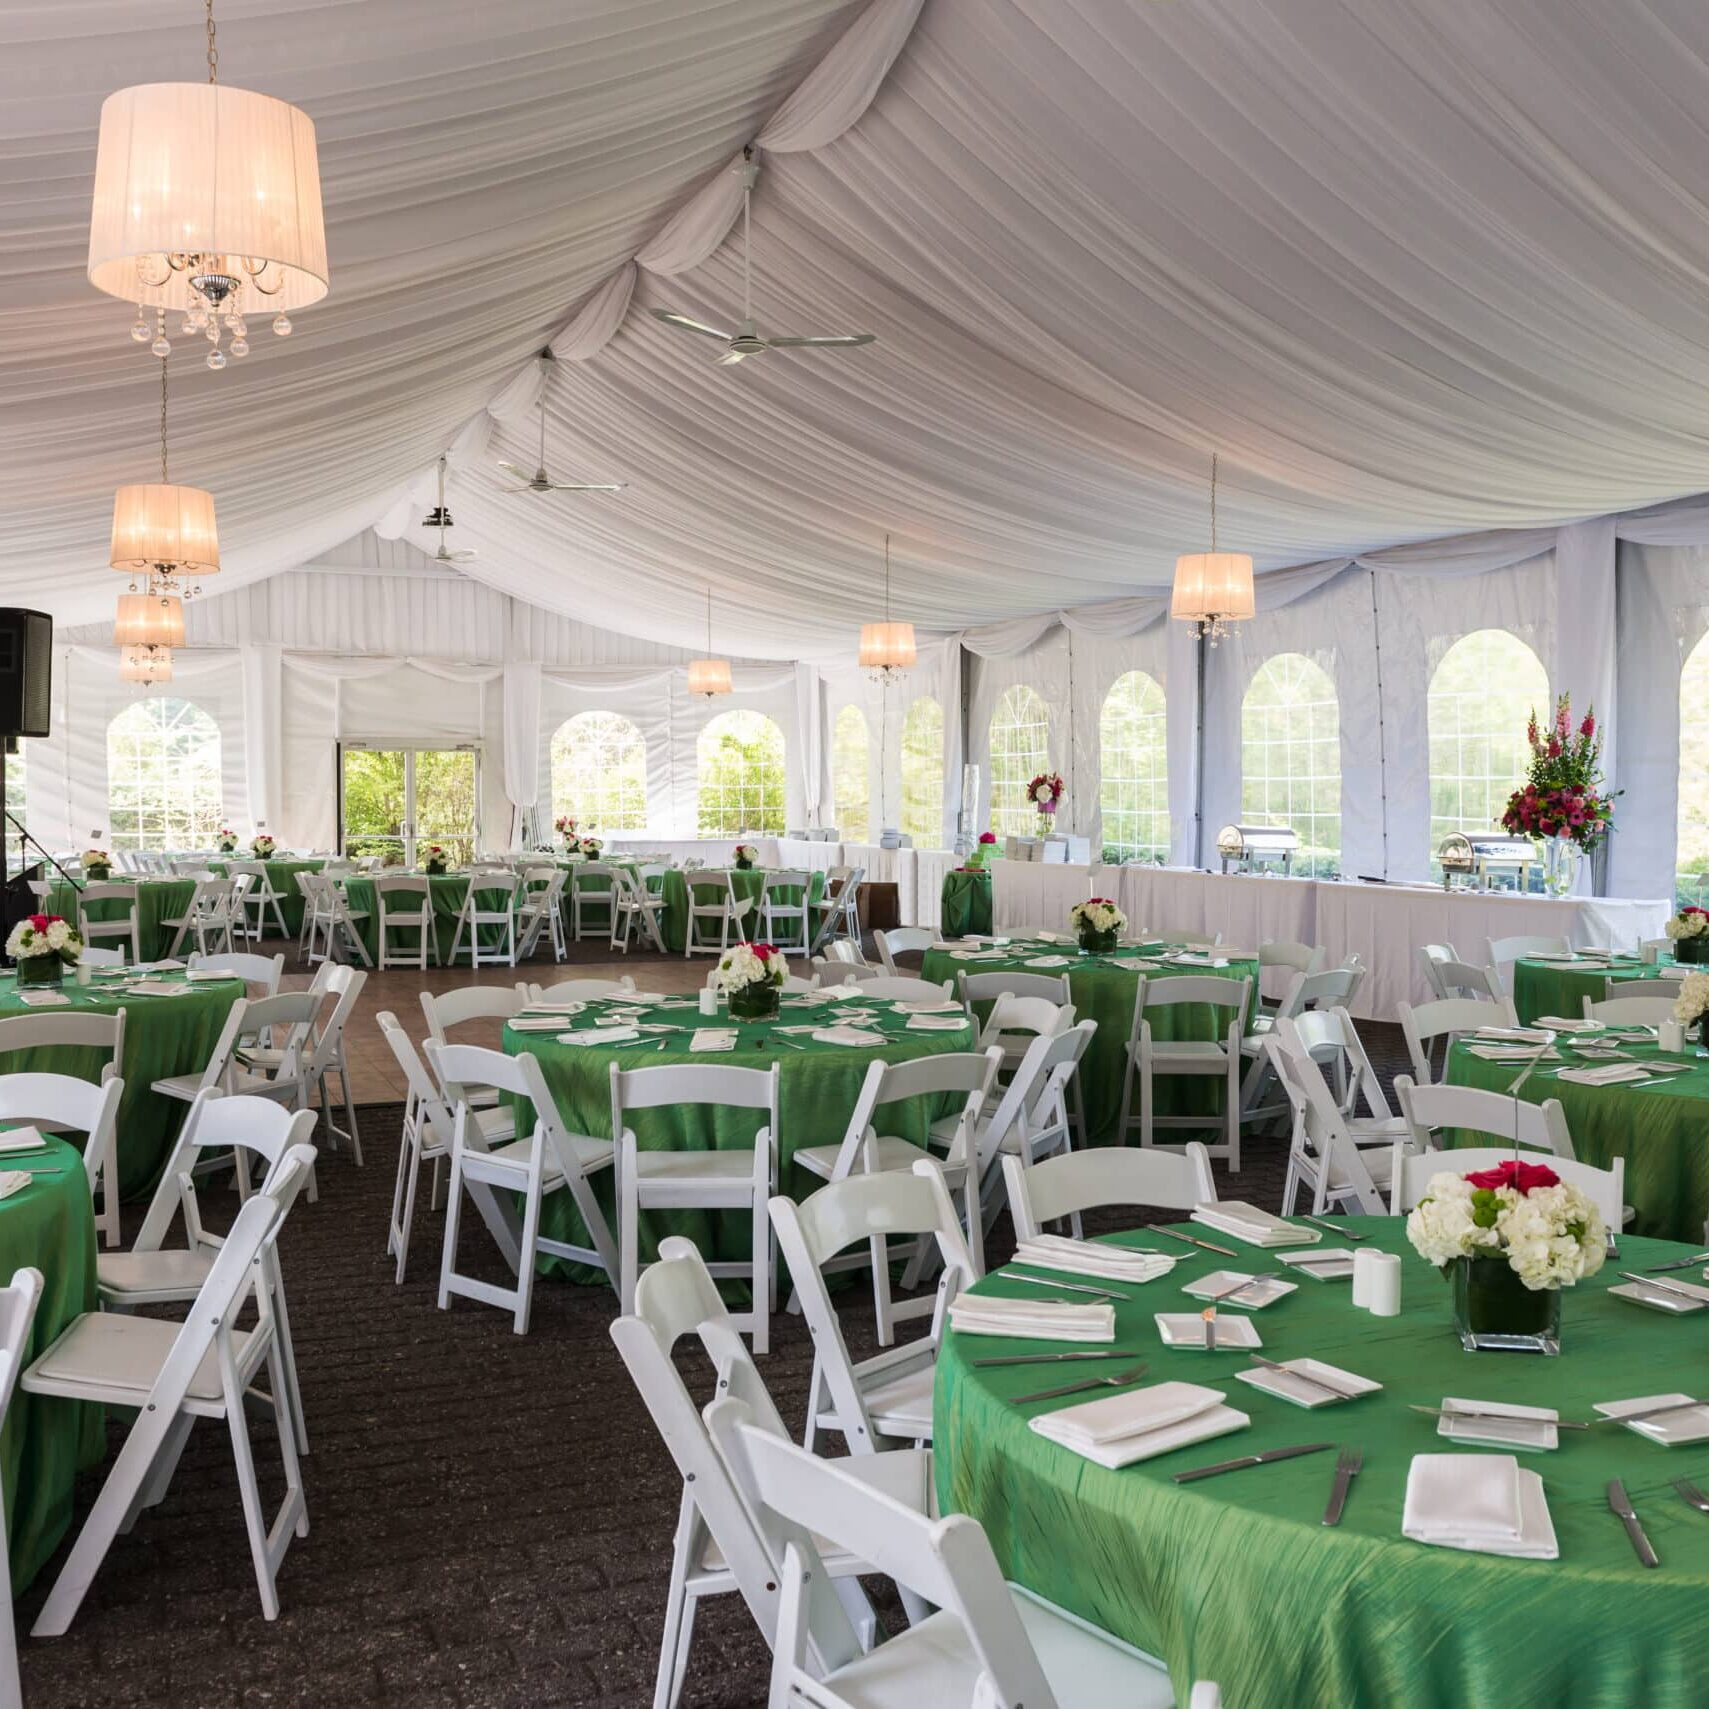 Corporate party table chairs tent and walls